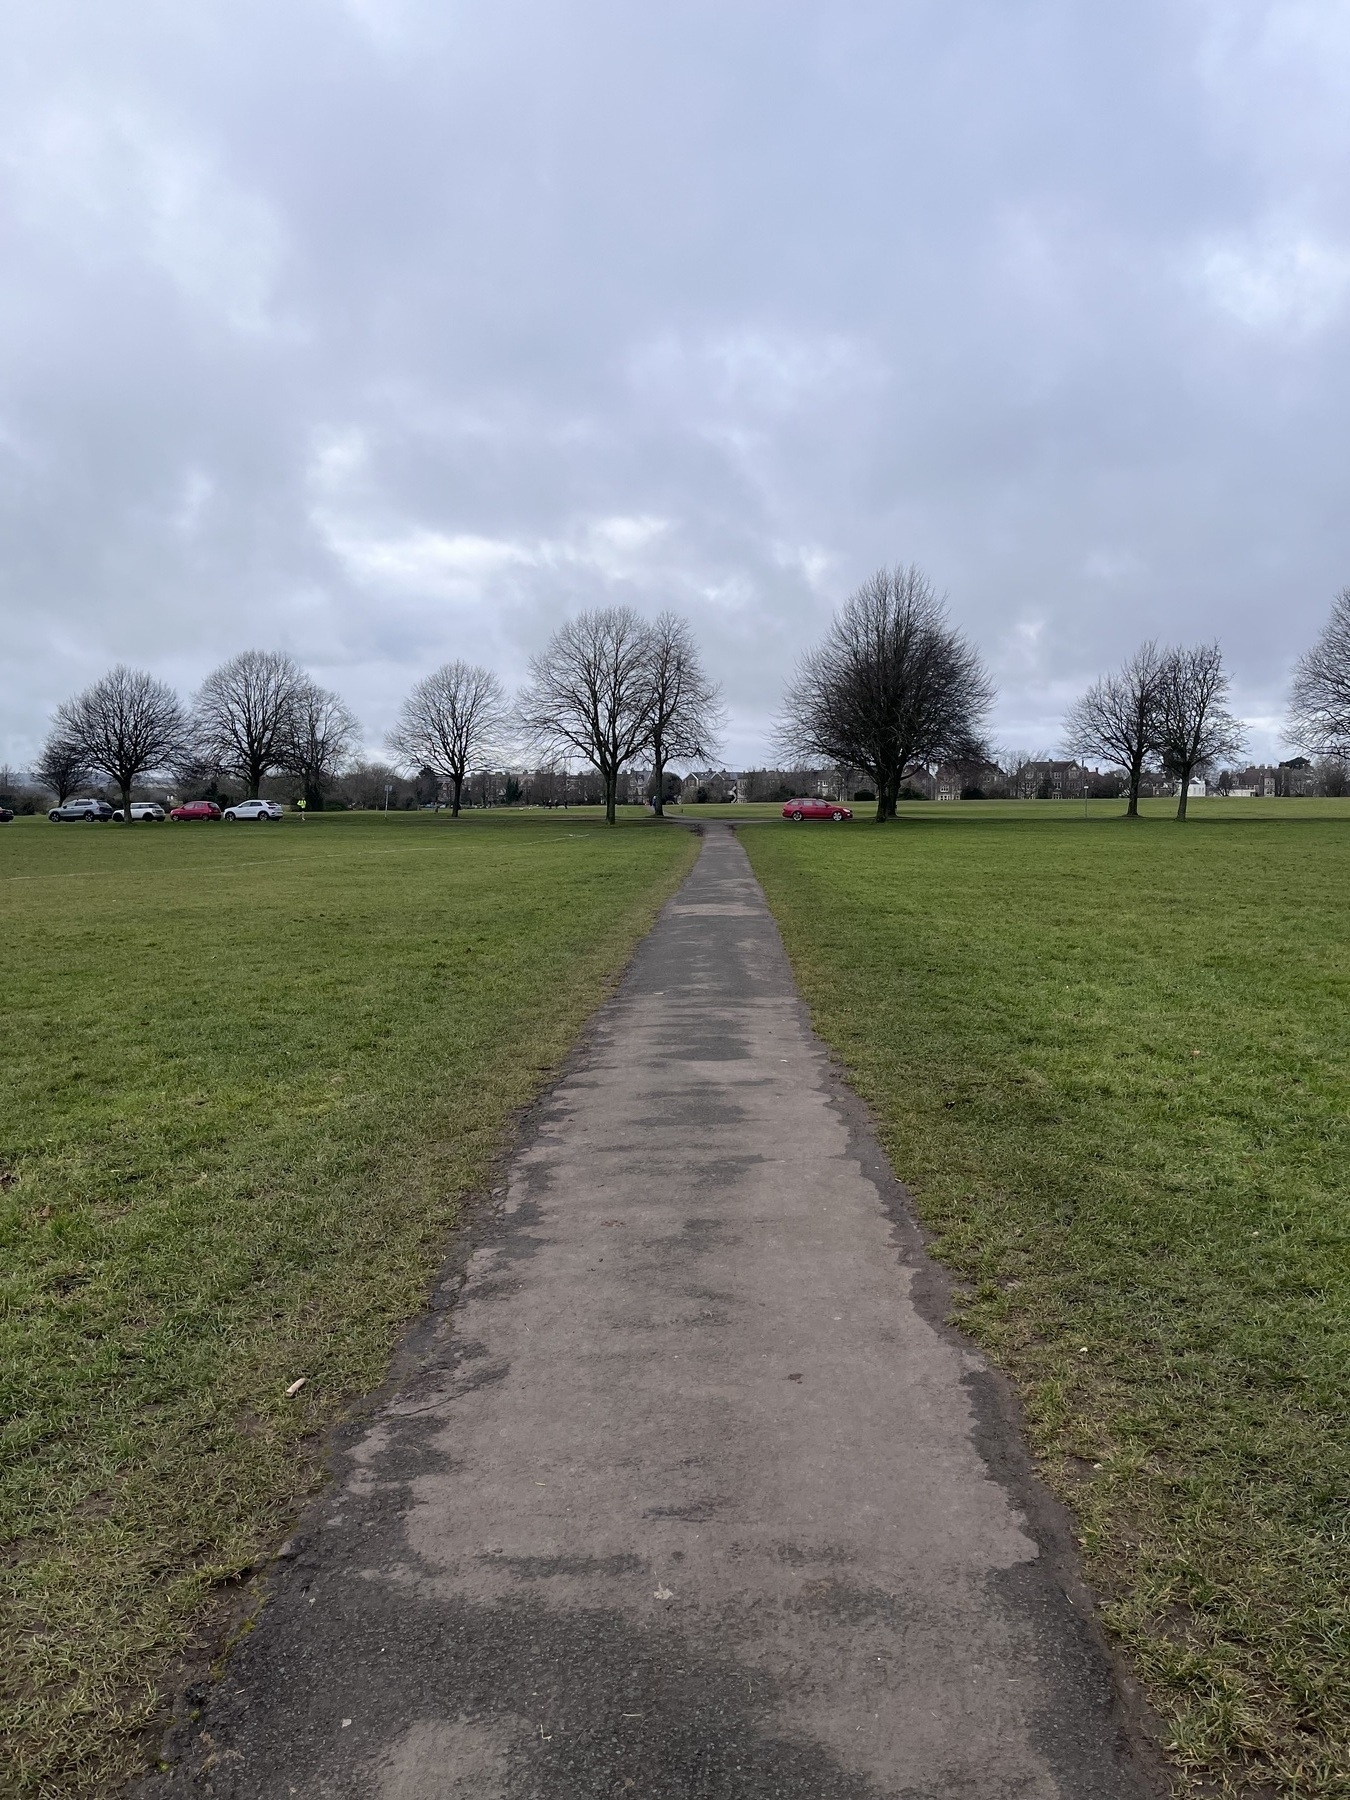 A straight paved path across a field with a row of trees with no leaves in the distance and cars parked under them. It looks like a winters day